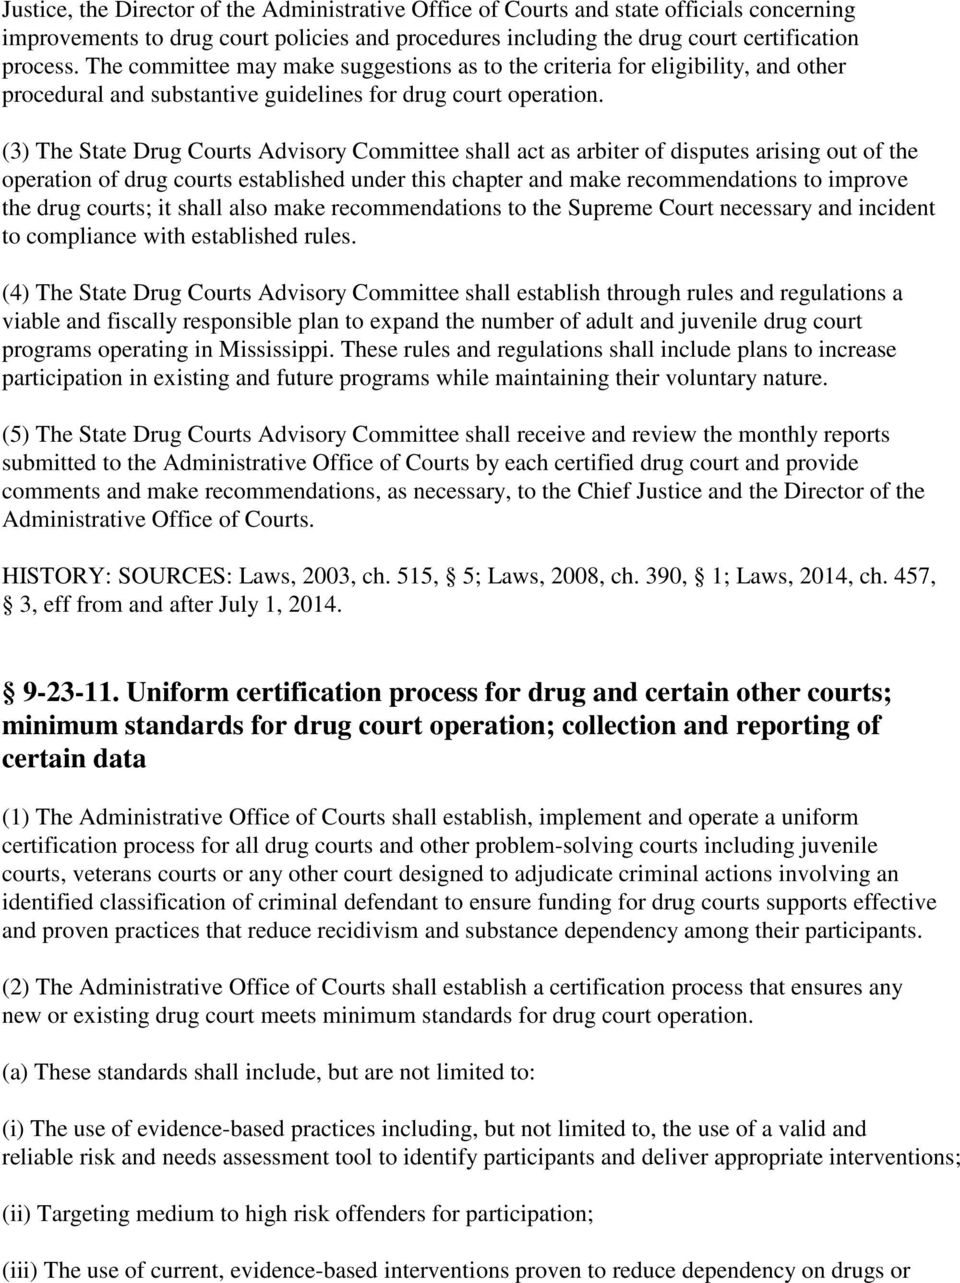 (3) The State Drug Courts Advisory Committee shall act as arbiter of disputes arising out of the operation of drug courts established under this chapter and make recommendations to improve the drug